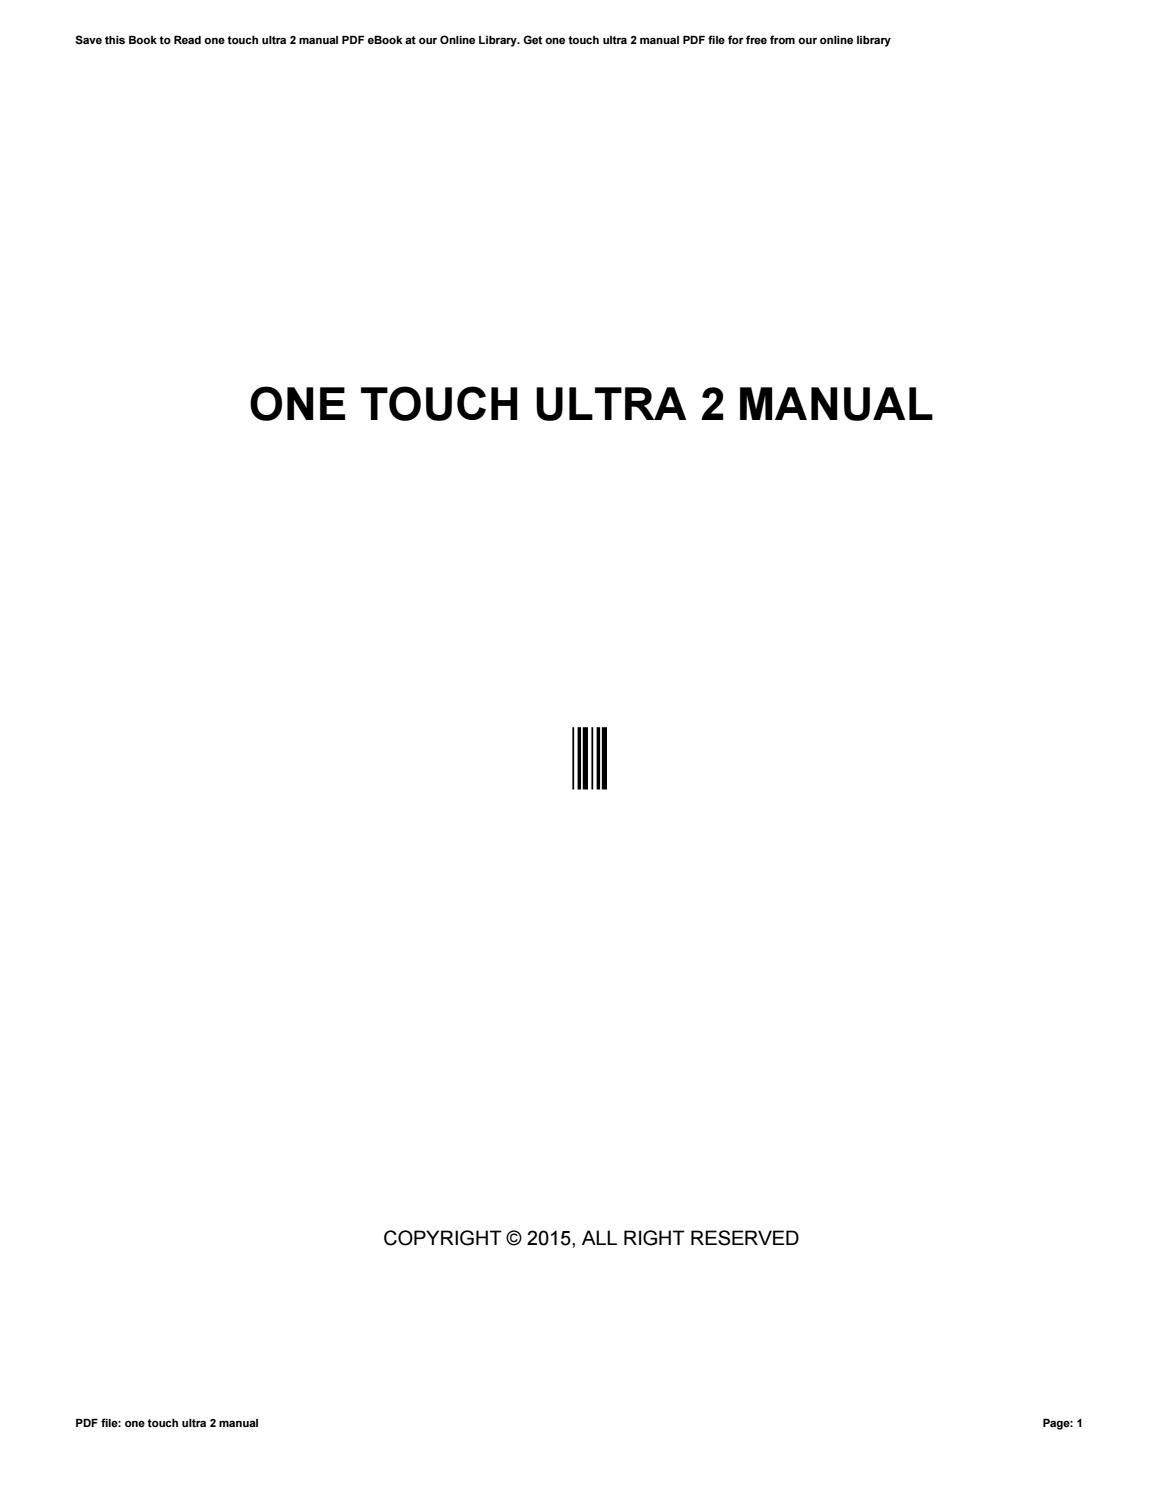 one touch ultra user manual